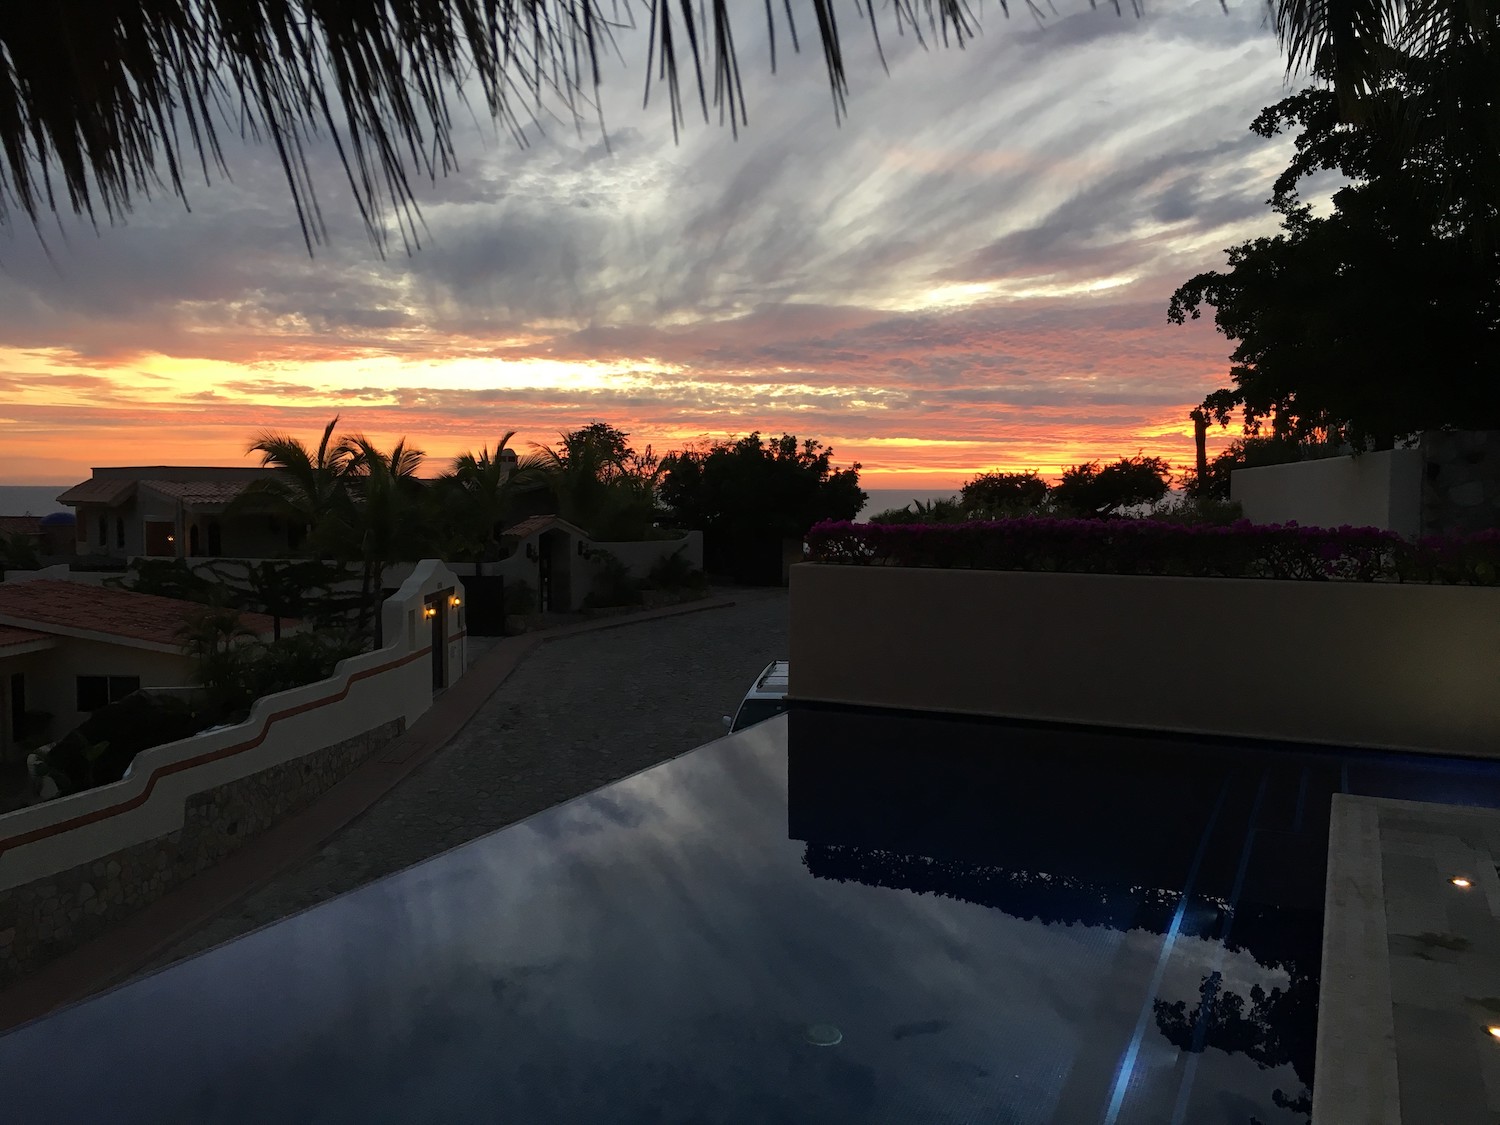 Sunset in Cabo